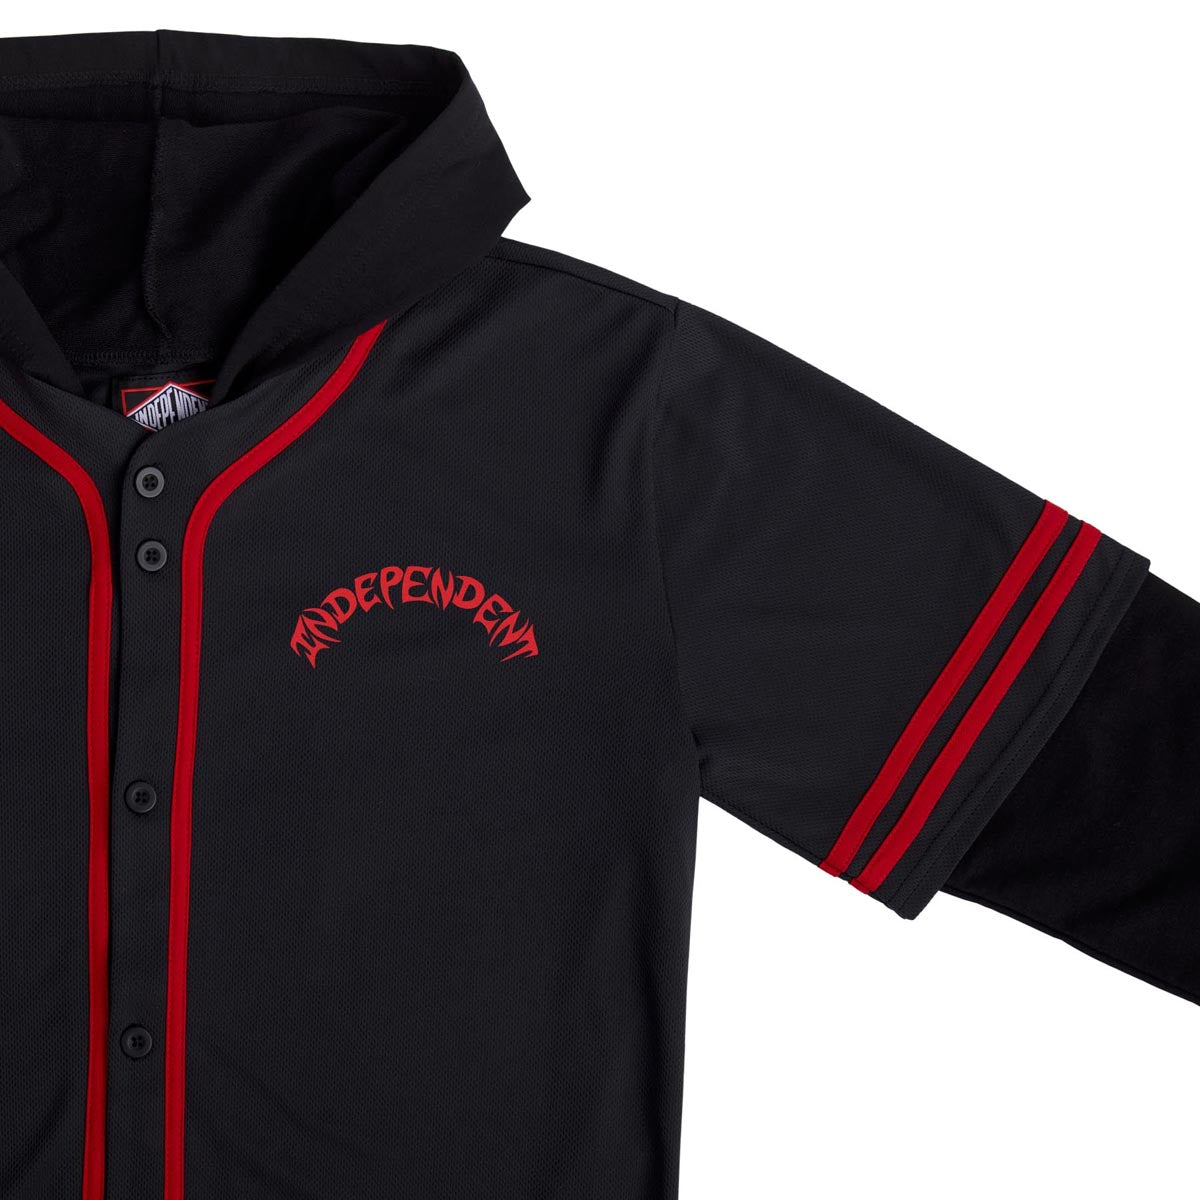 Independent Night Prowlers Long Sleeve Hooded Jersey - Black image 3